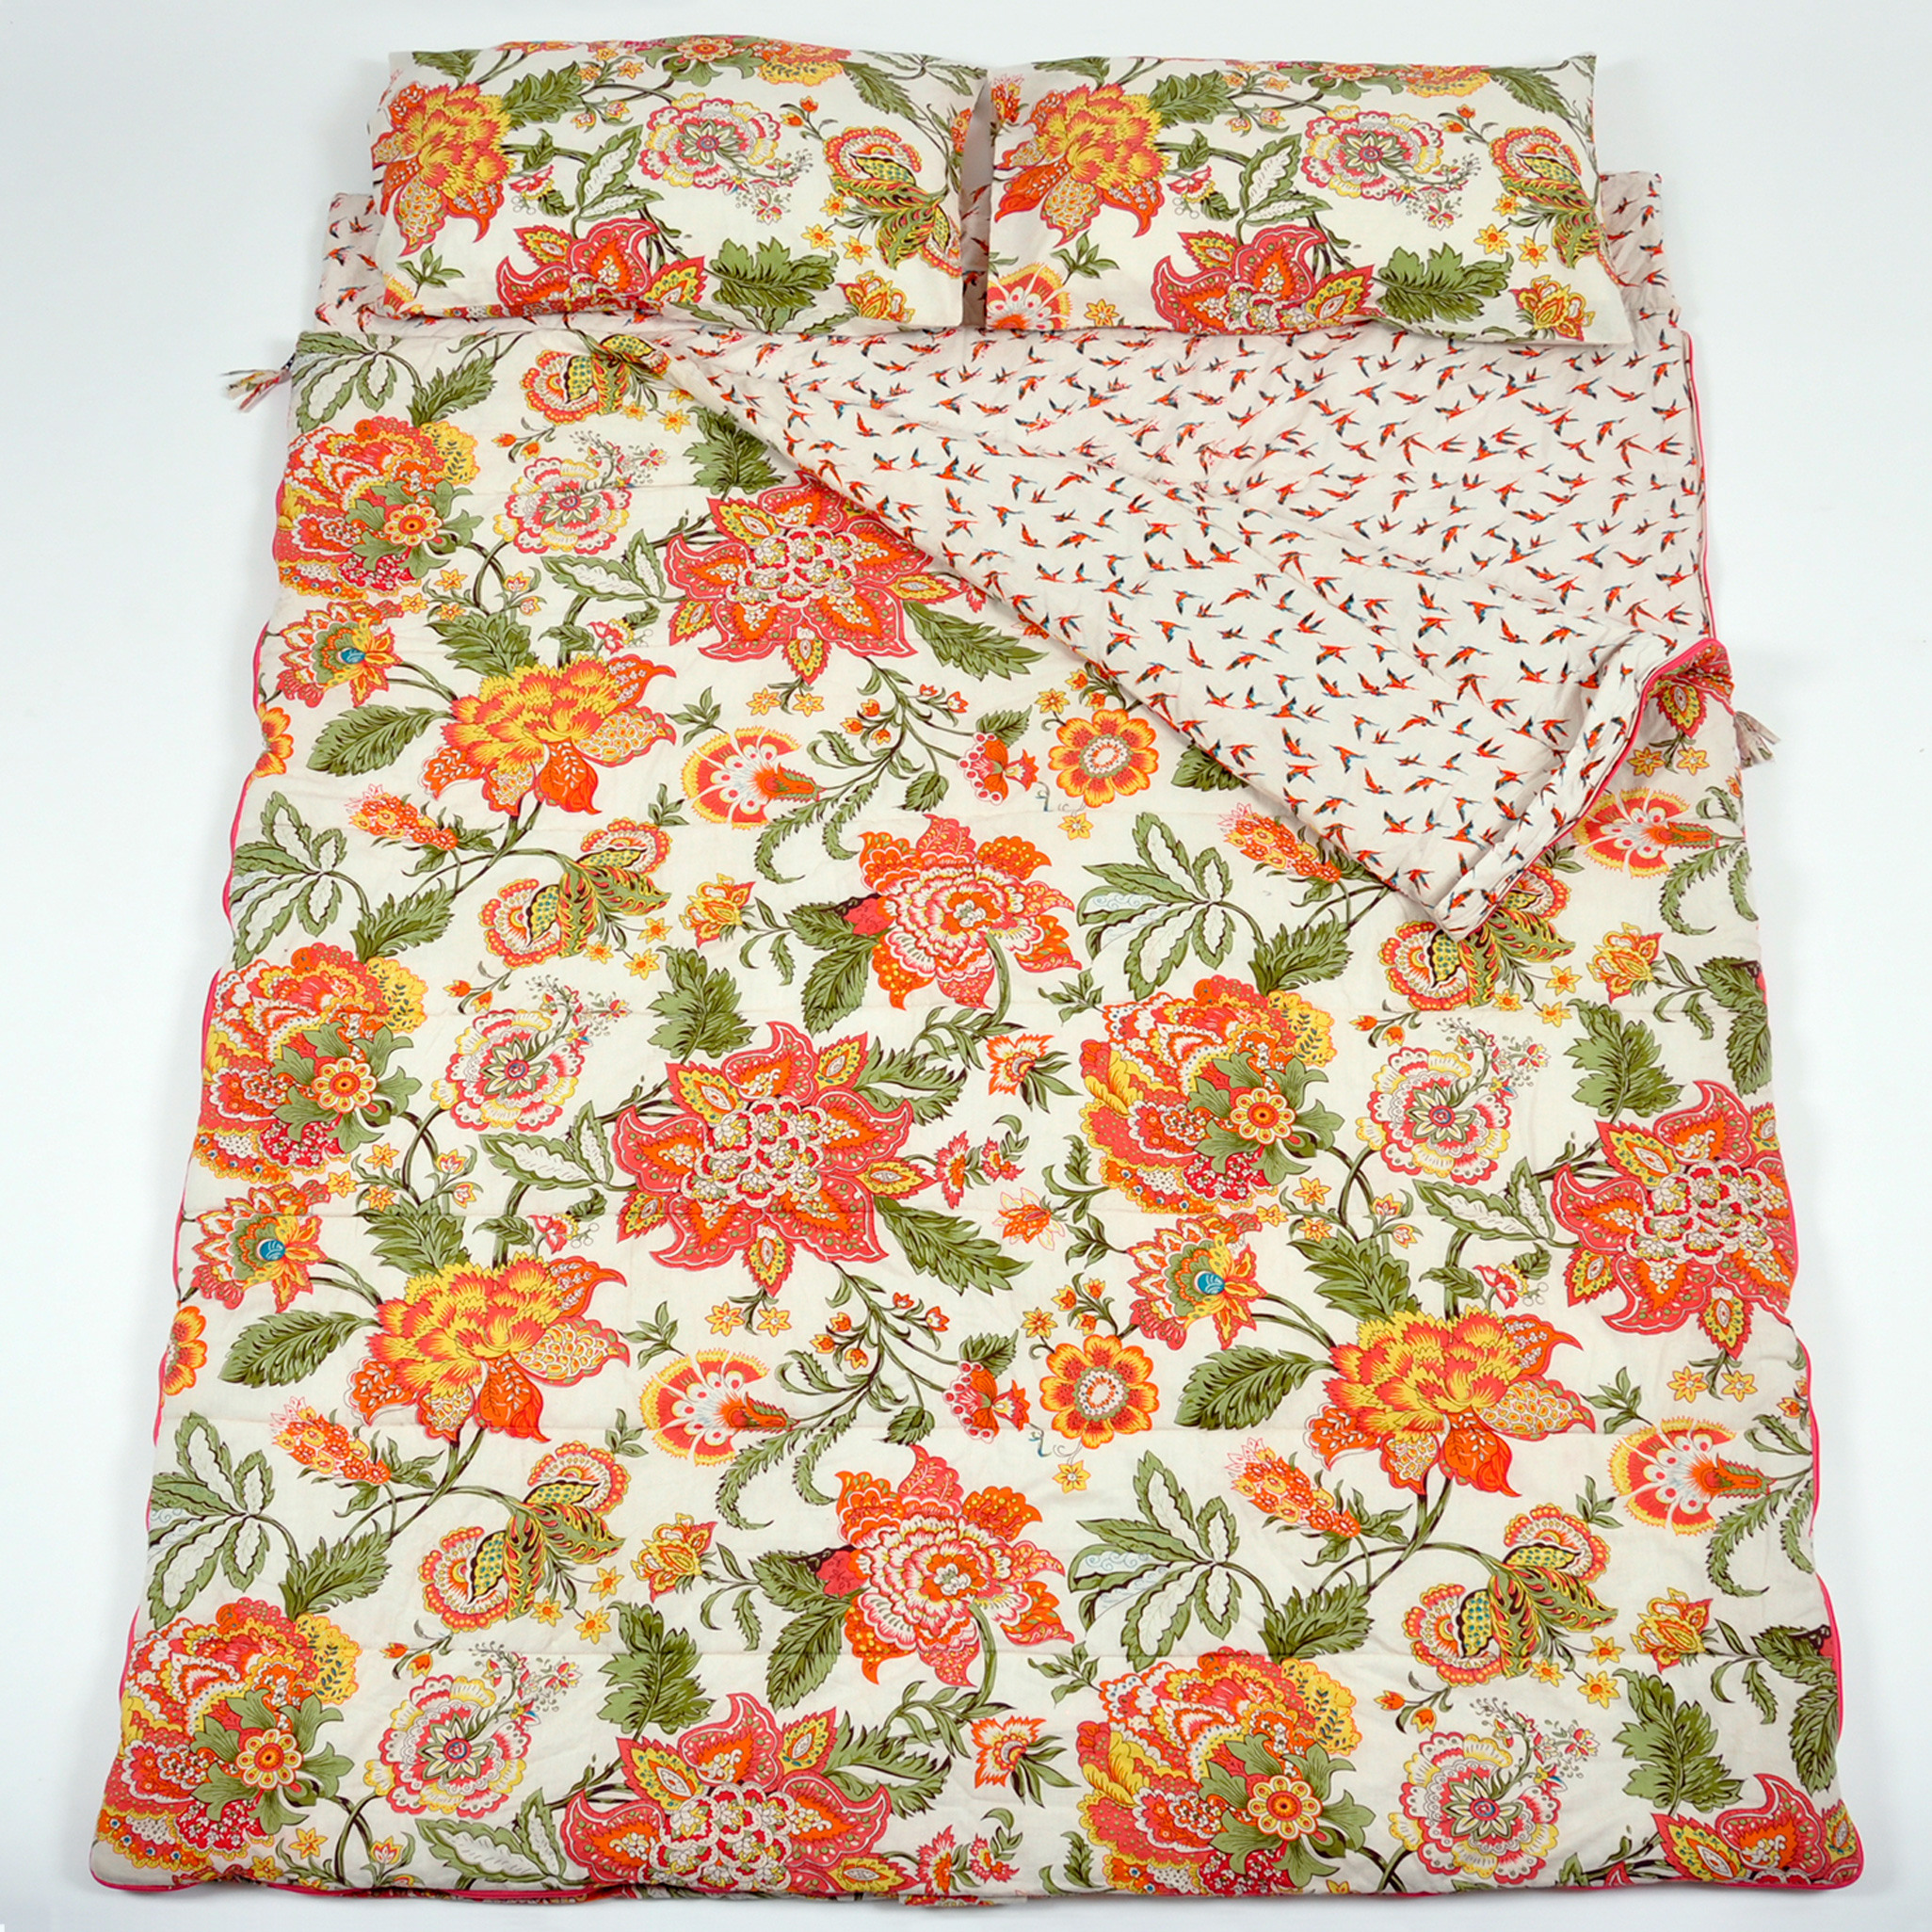 Wild Floral double sleeping bag